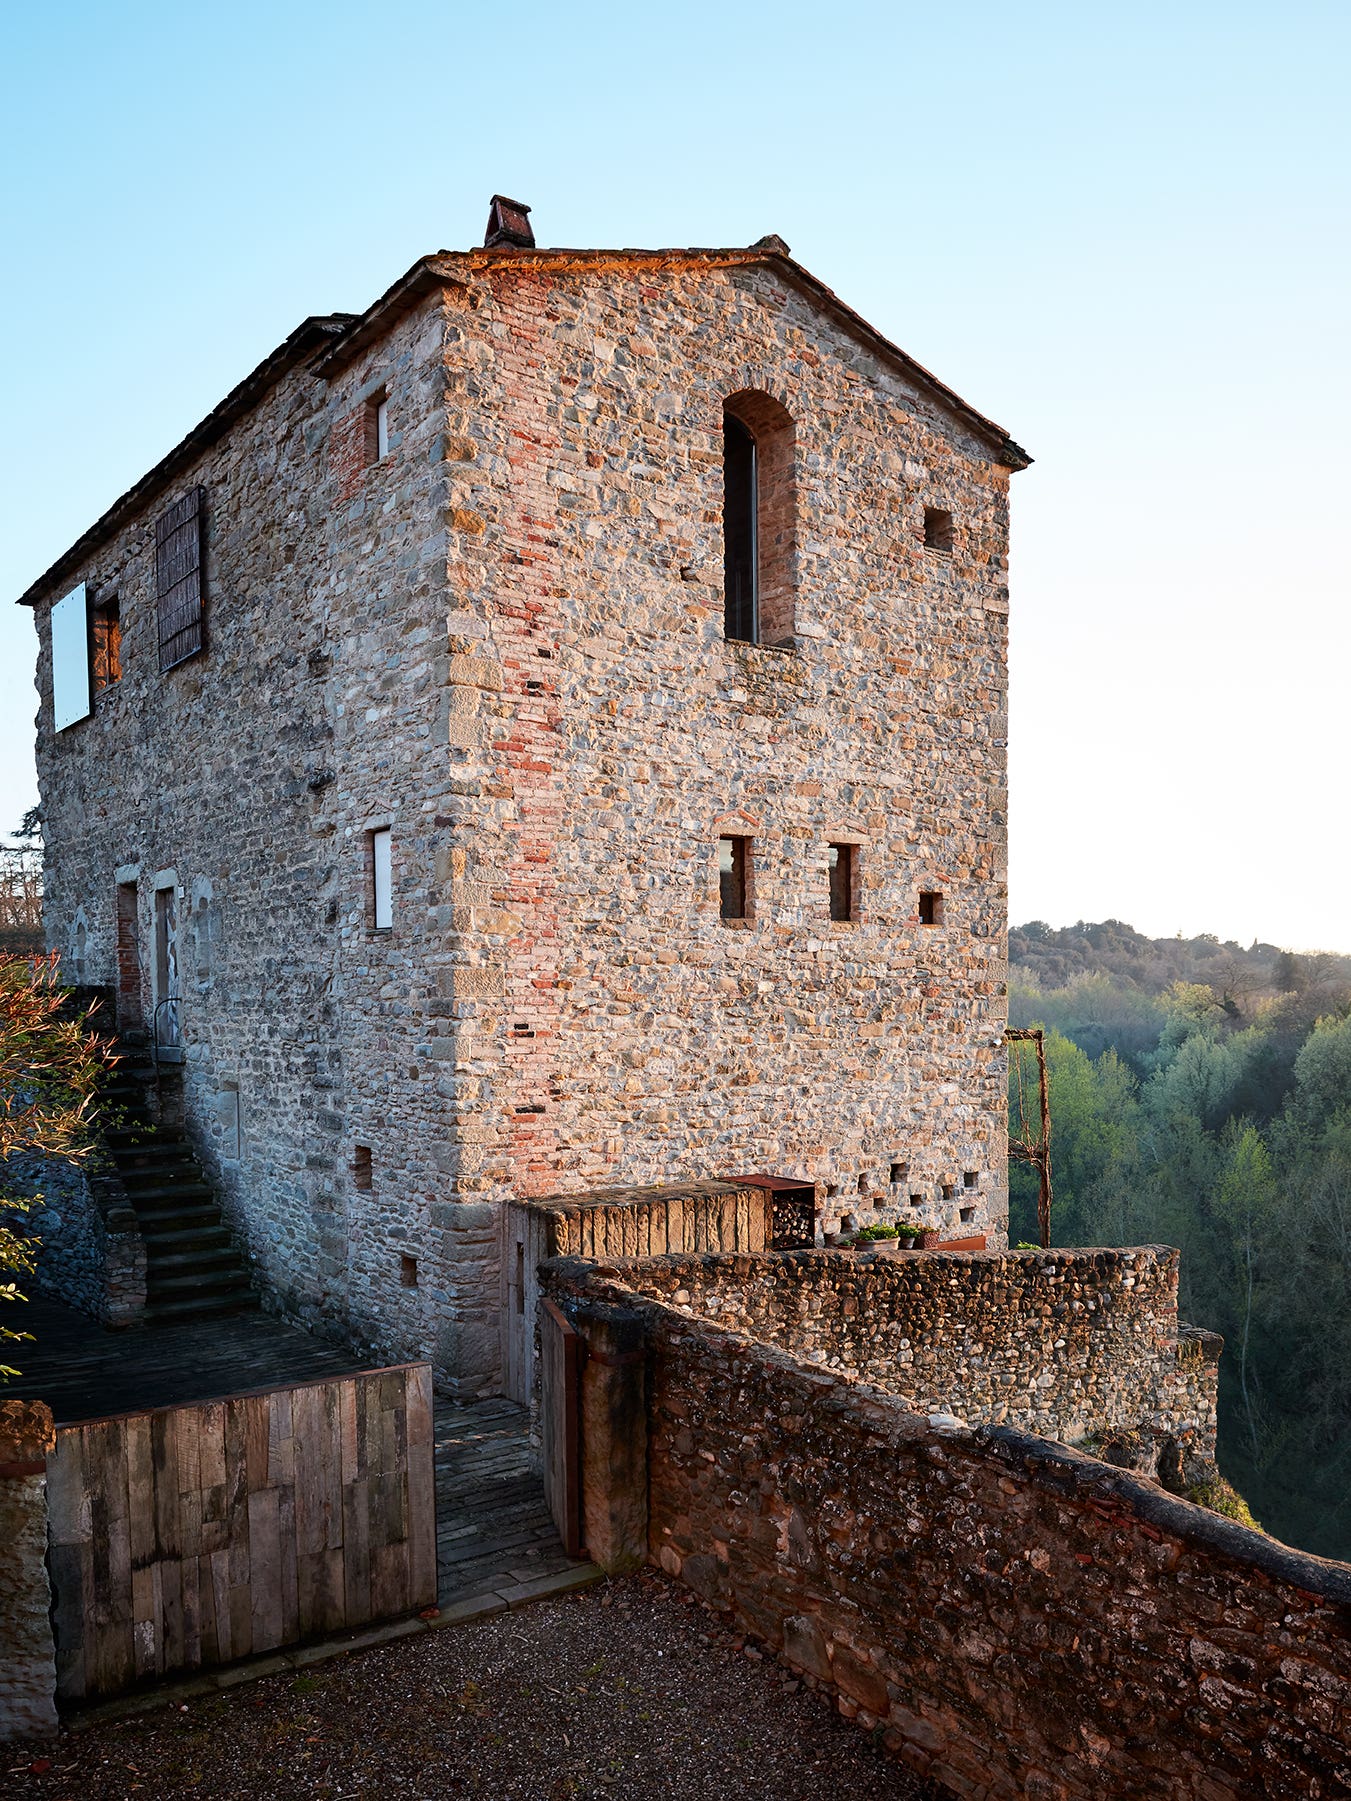 Prada’s Architect Transformed This 11th-Century Tuscan Watchtower Into a Dreamy Guesthouse